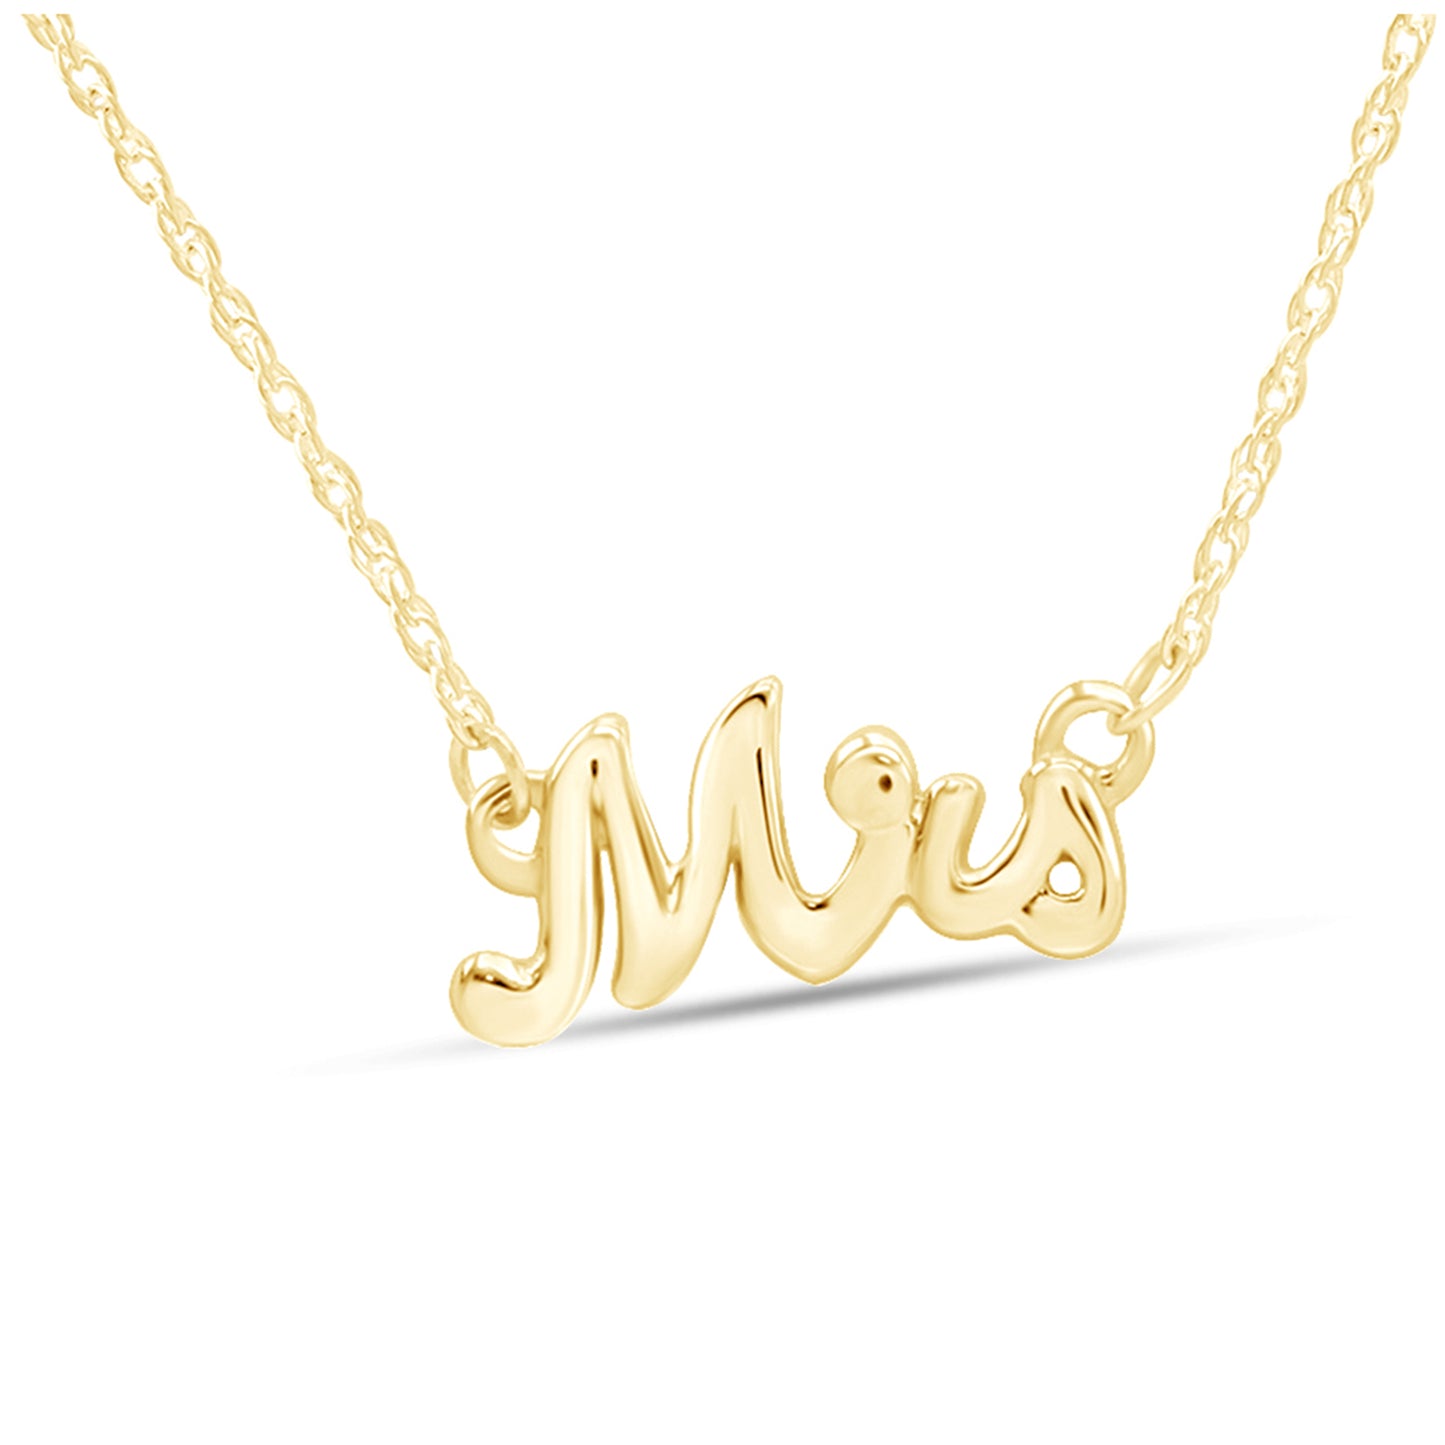 Load image into Gallery viewer, Mrs. Pendant Necklace For Womens In Sterling Silver
